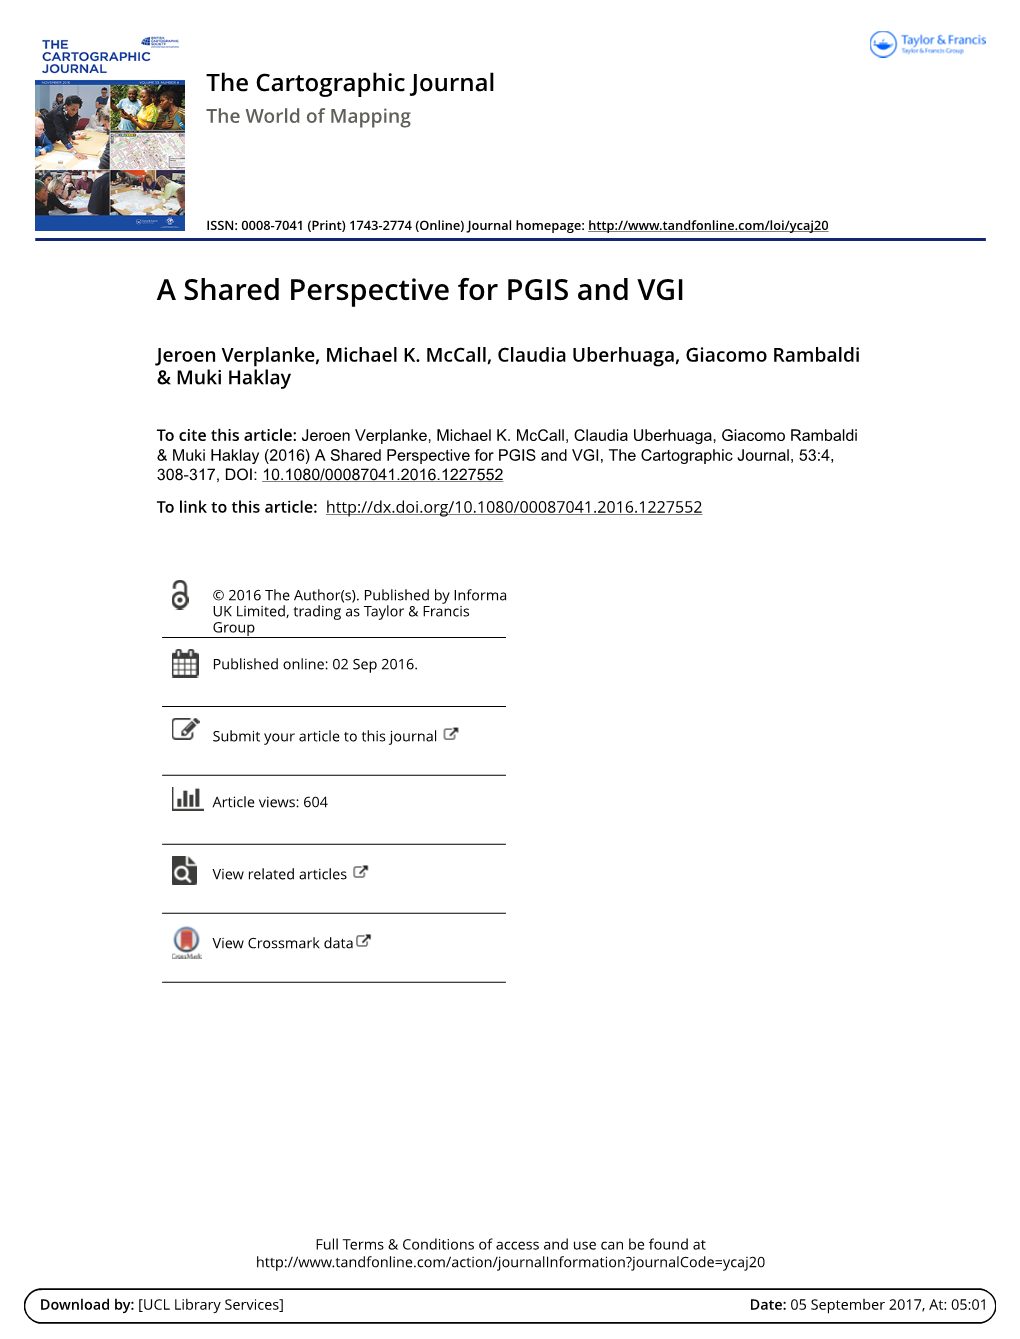 A Shared Perspective for PGIS and VGI